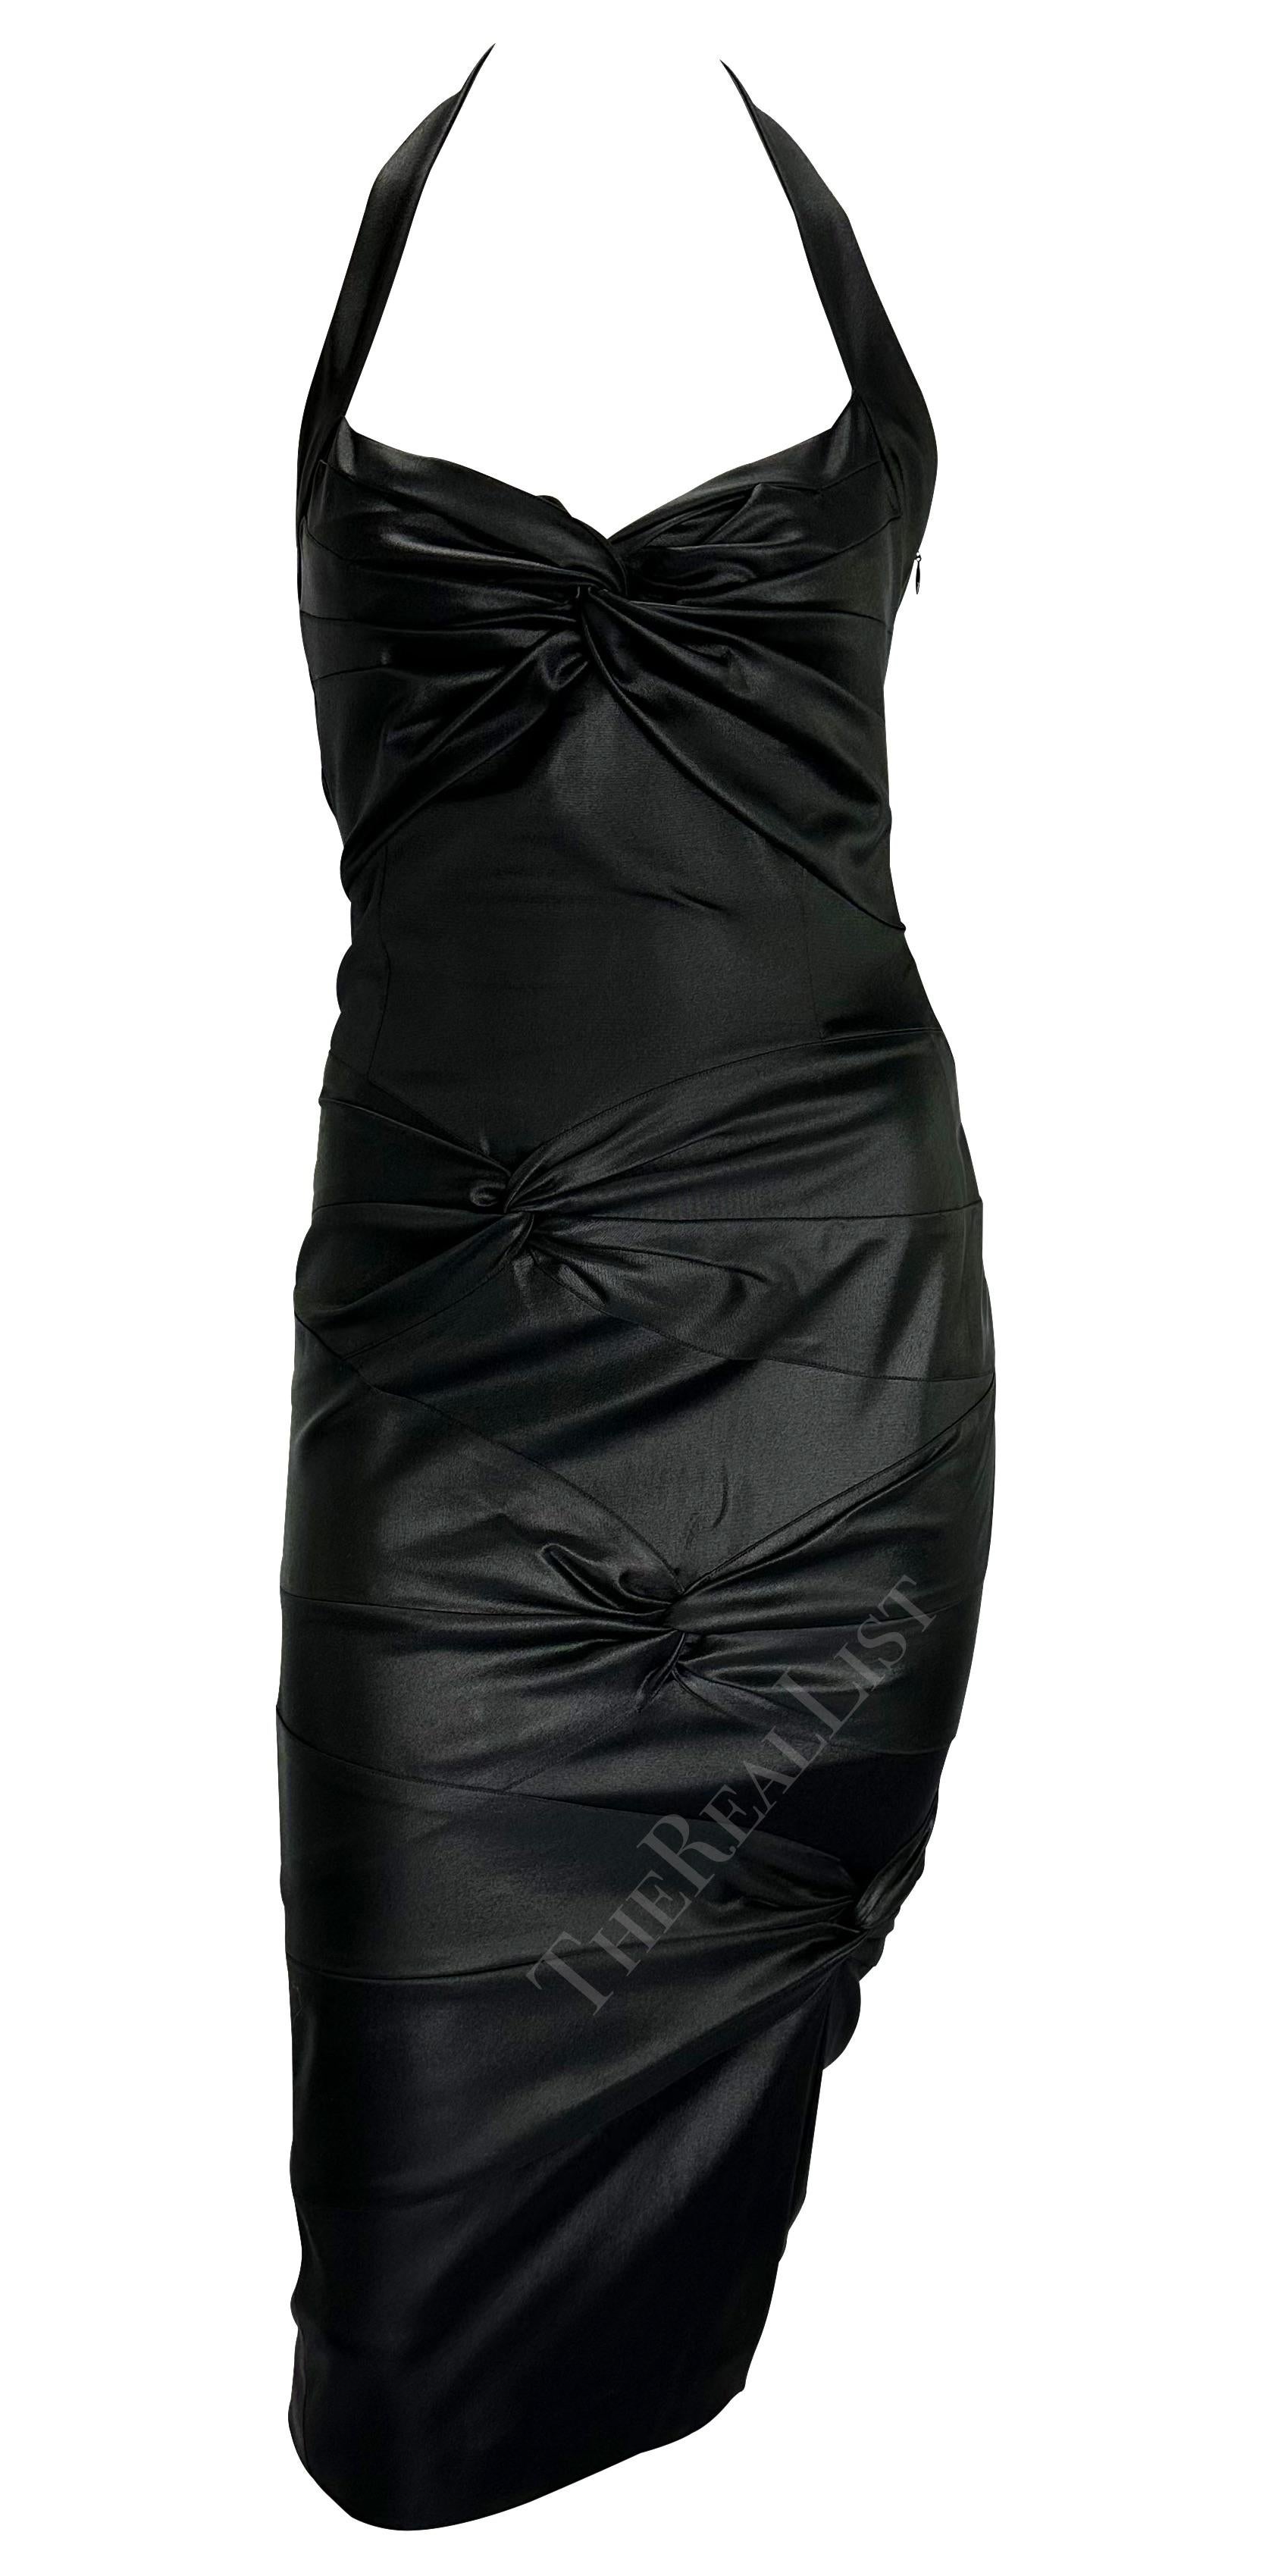 F/W 2003 Christian Dior by John Galliano Black Bodycon Stretch Knot Halter Dress In Excellent Condition For Sale In West Hollywood, CA